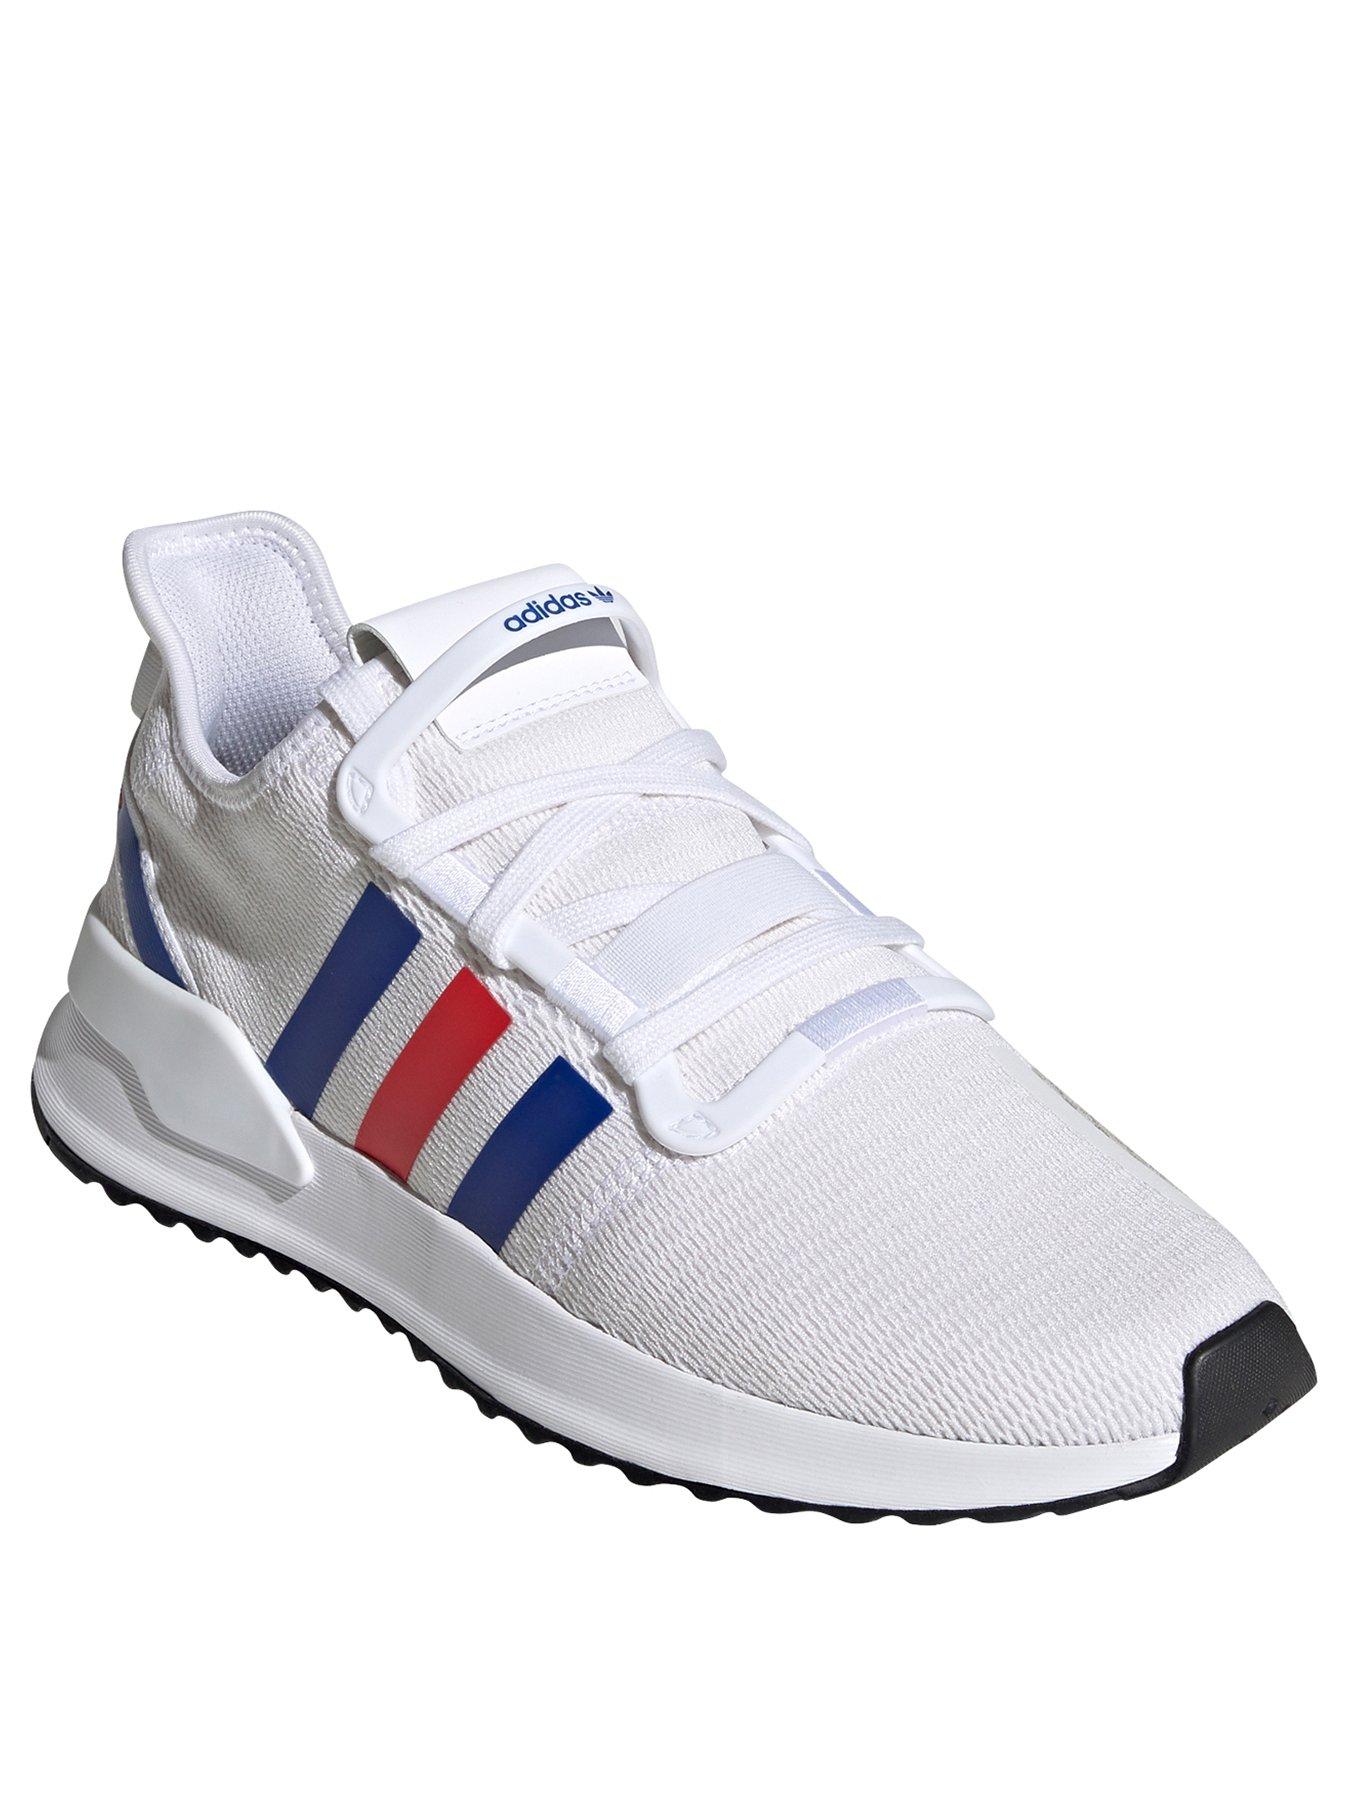 white red and blue adidas